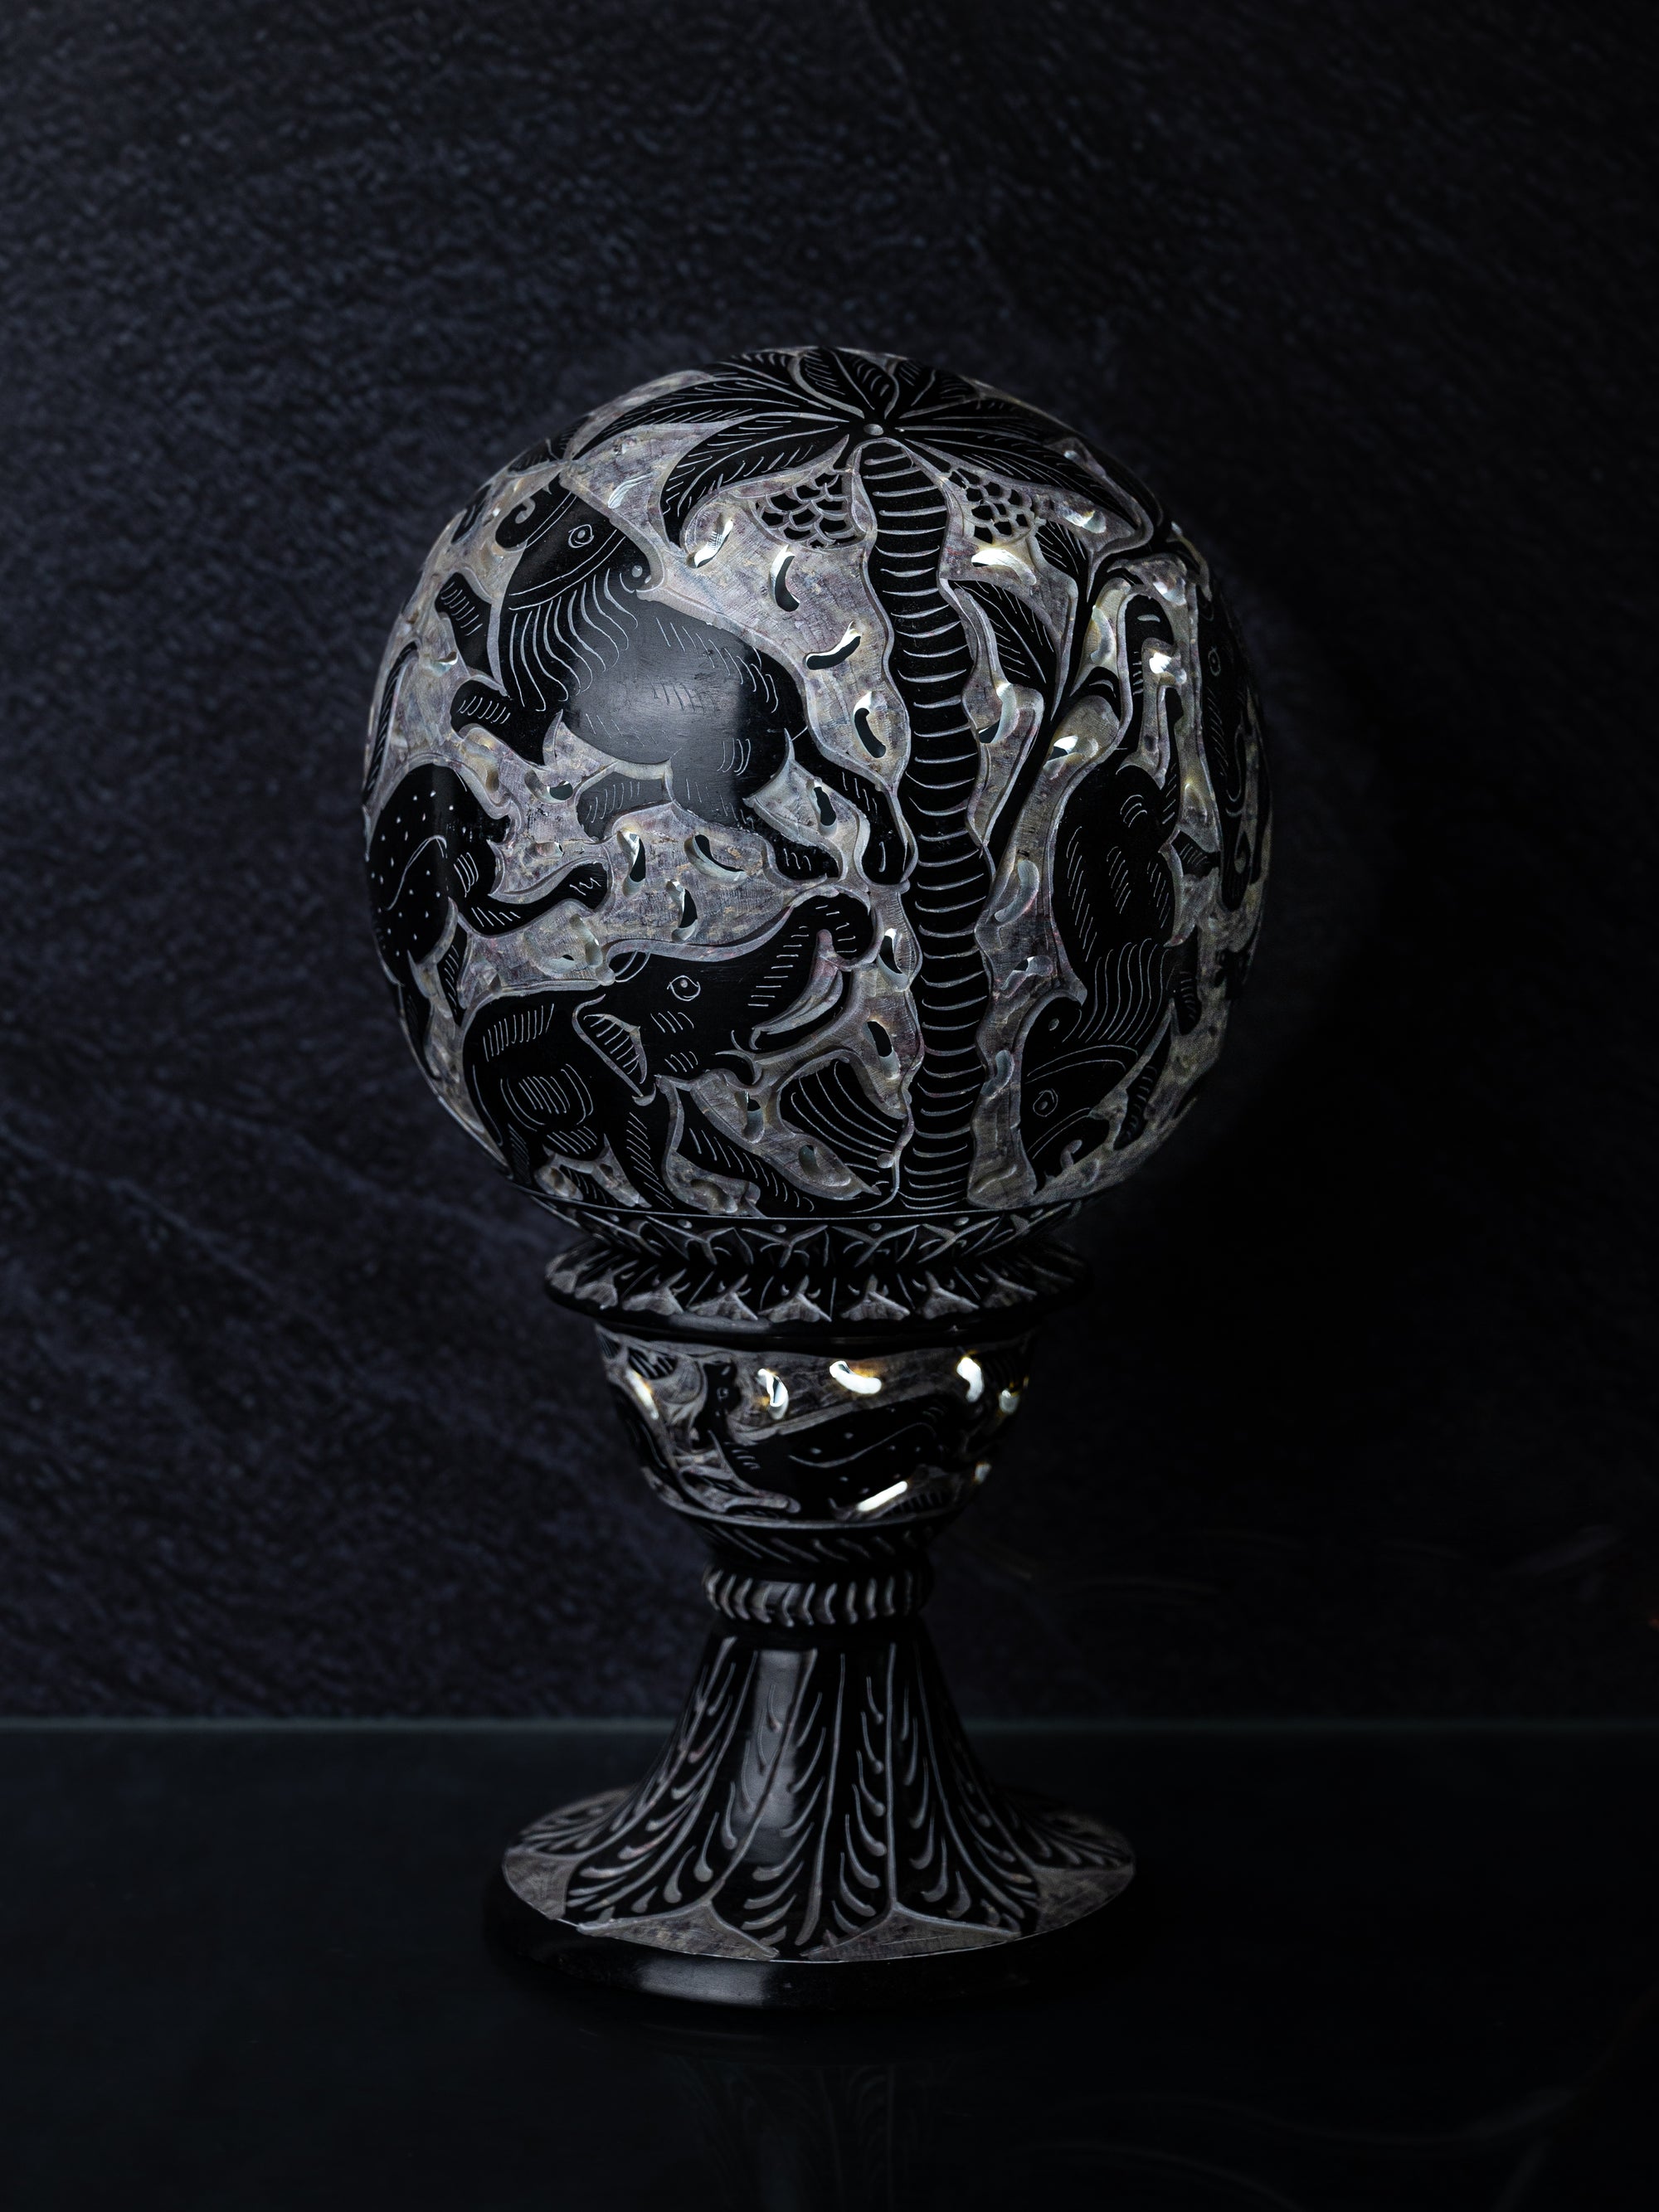 Black Stone Hand Crafted Round Ball Lamp Decor - 10 inches height